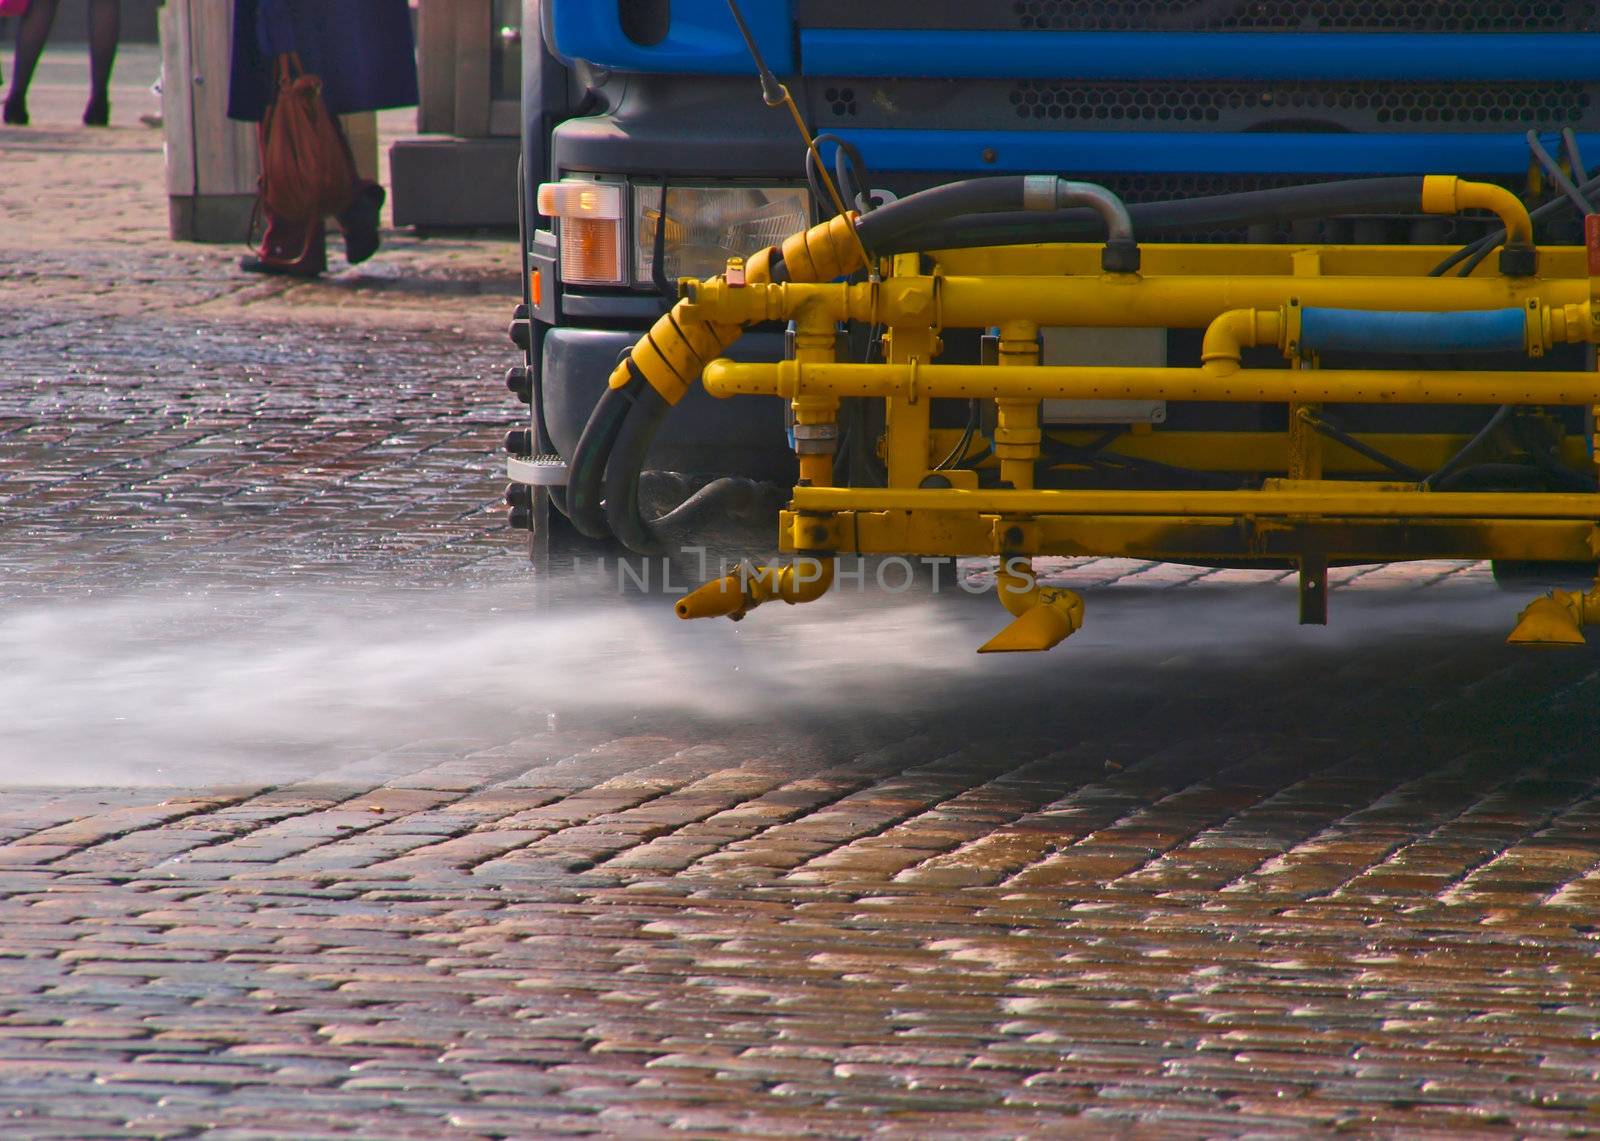 street cleaning machine by dotweb